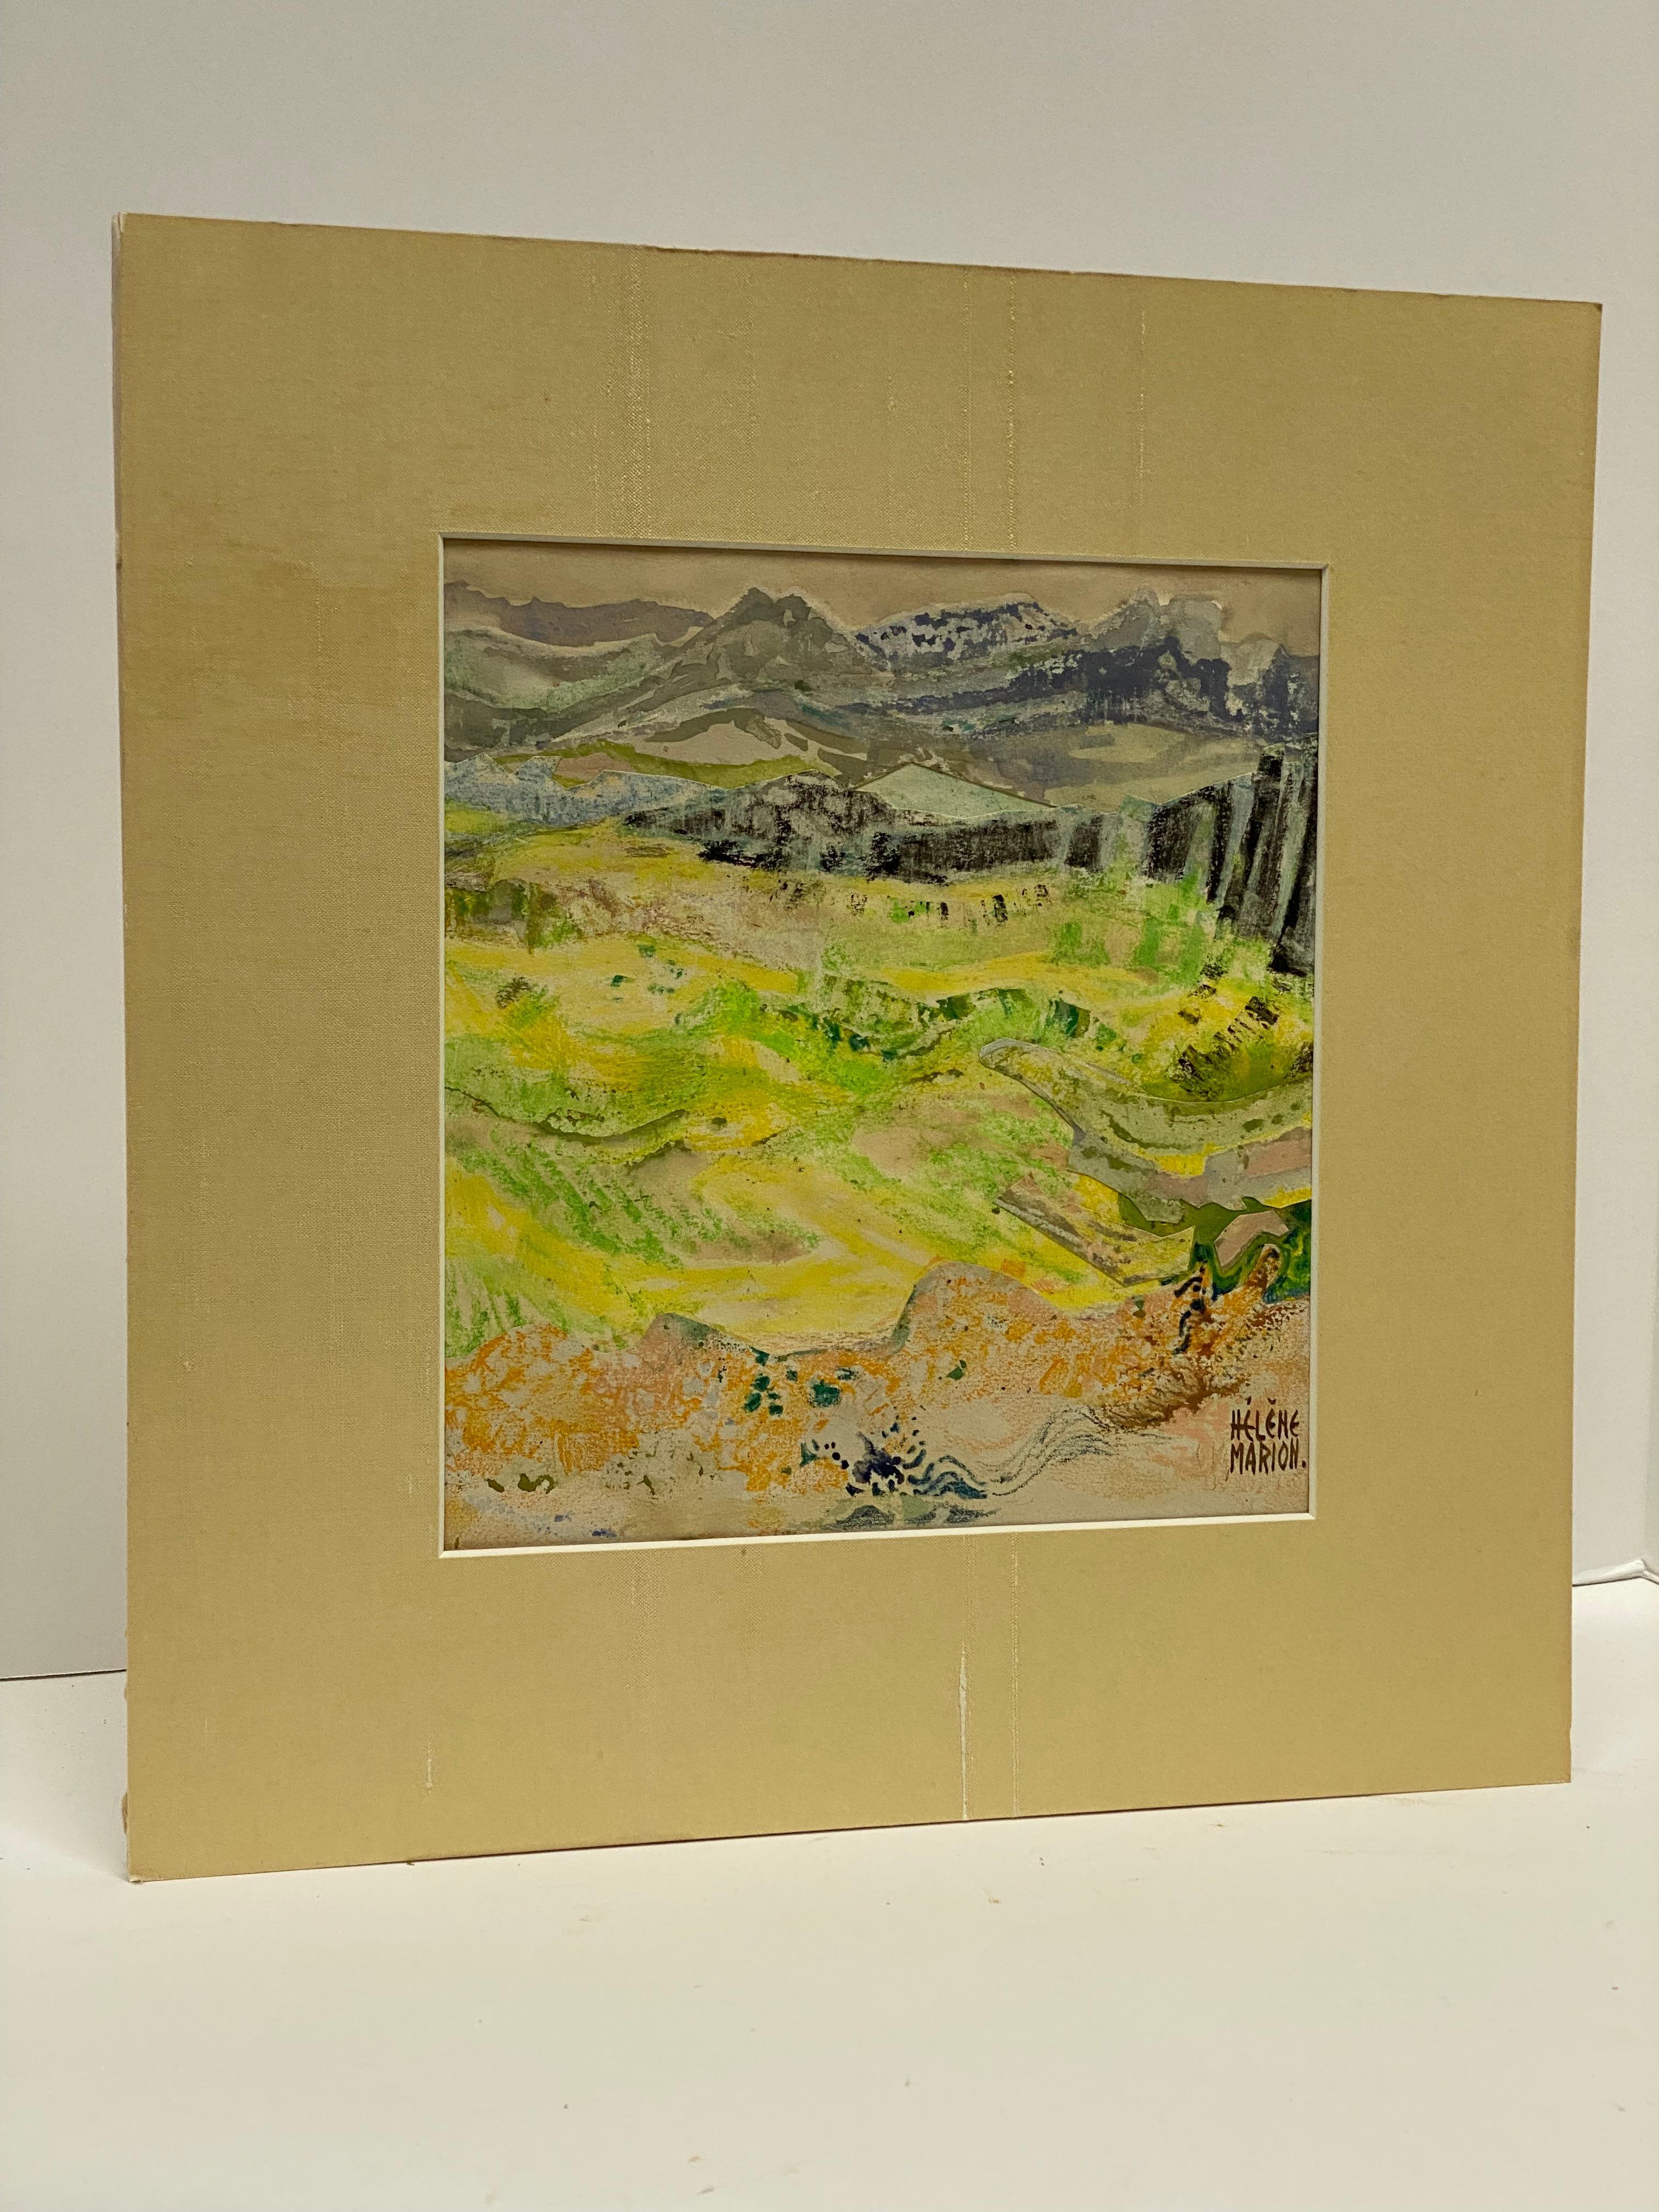 A fine and diminutive painting/collage by French artist, Helene Marion (1920-?). The medium is watercolor and oil pastel or crayon. The work of art is hand crafted and layered paper surfaces. Circa 1960-70. Signed lower right, Helene Marion. The